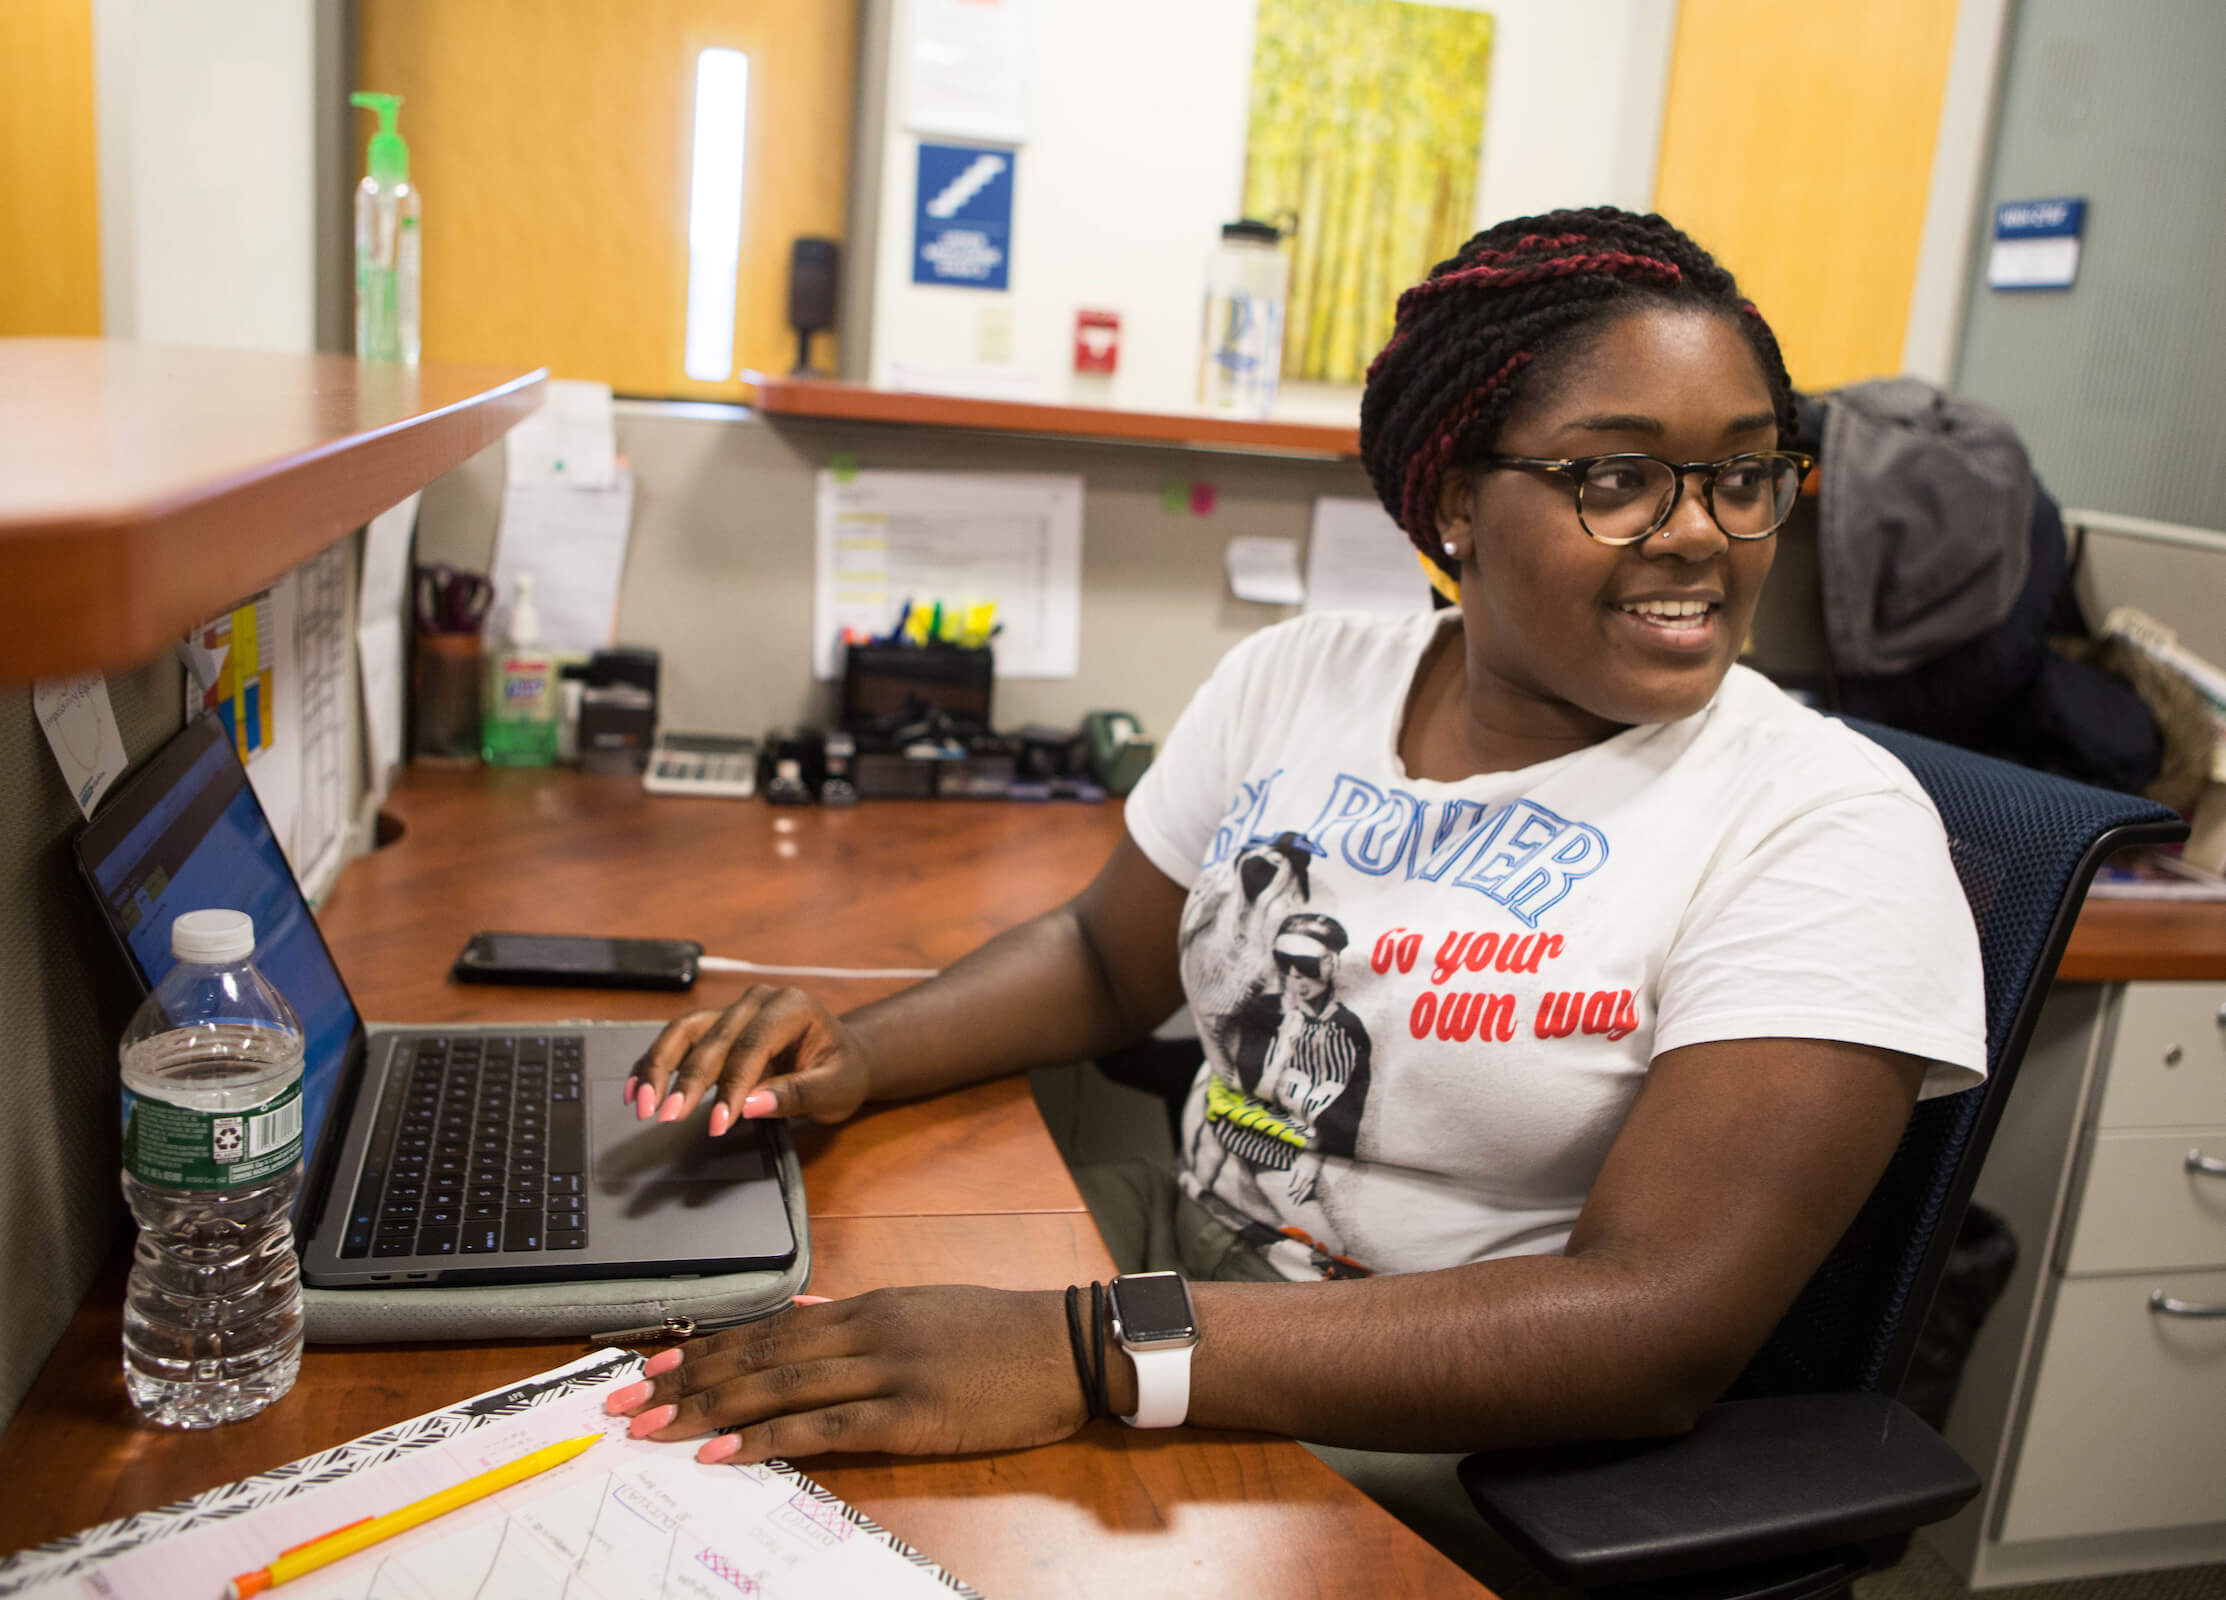 Student Cynthia Clemont sitting at a desk in front of a laptop in the Graduate Student Affairs Office.